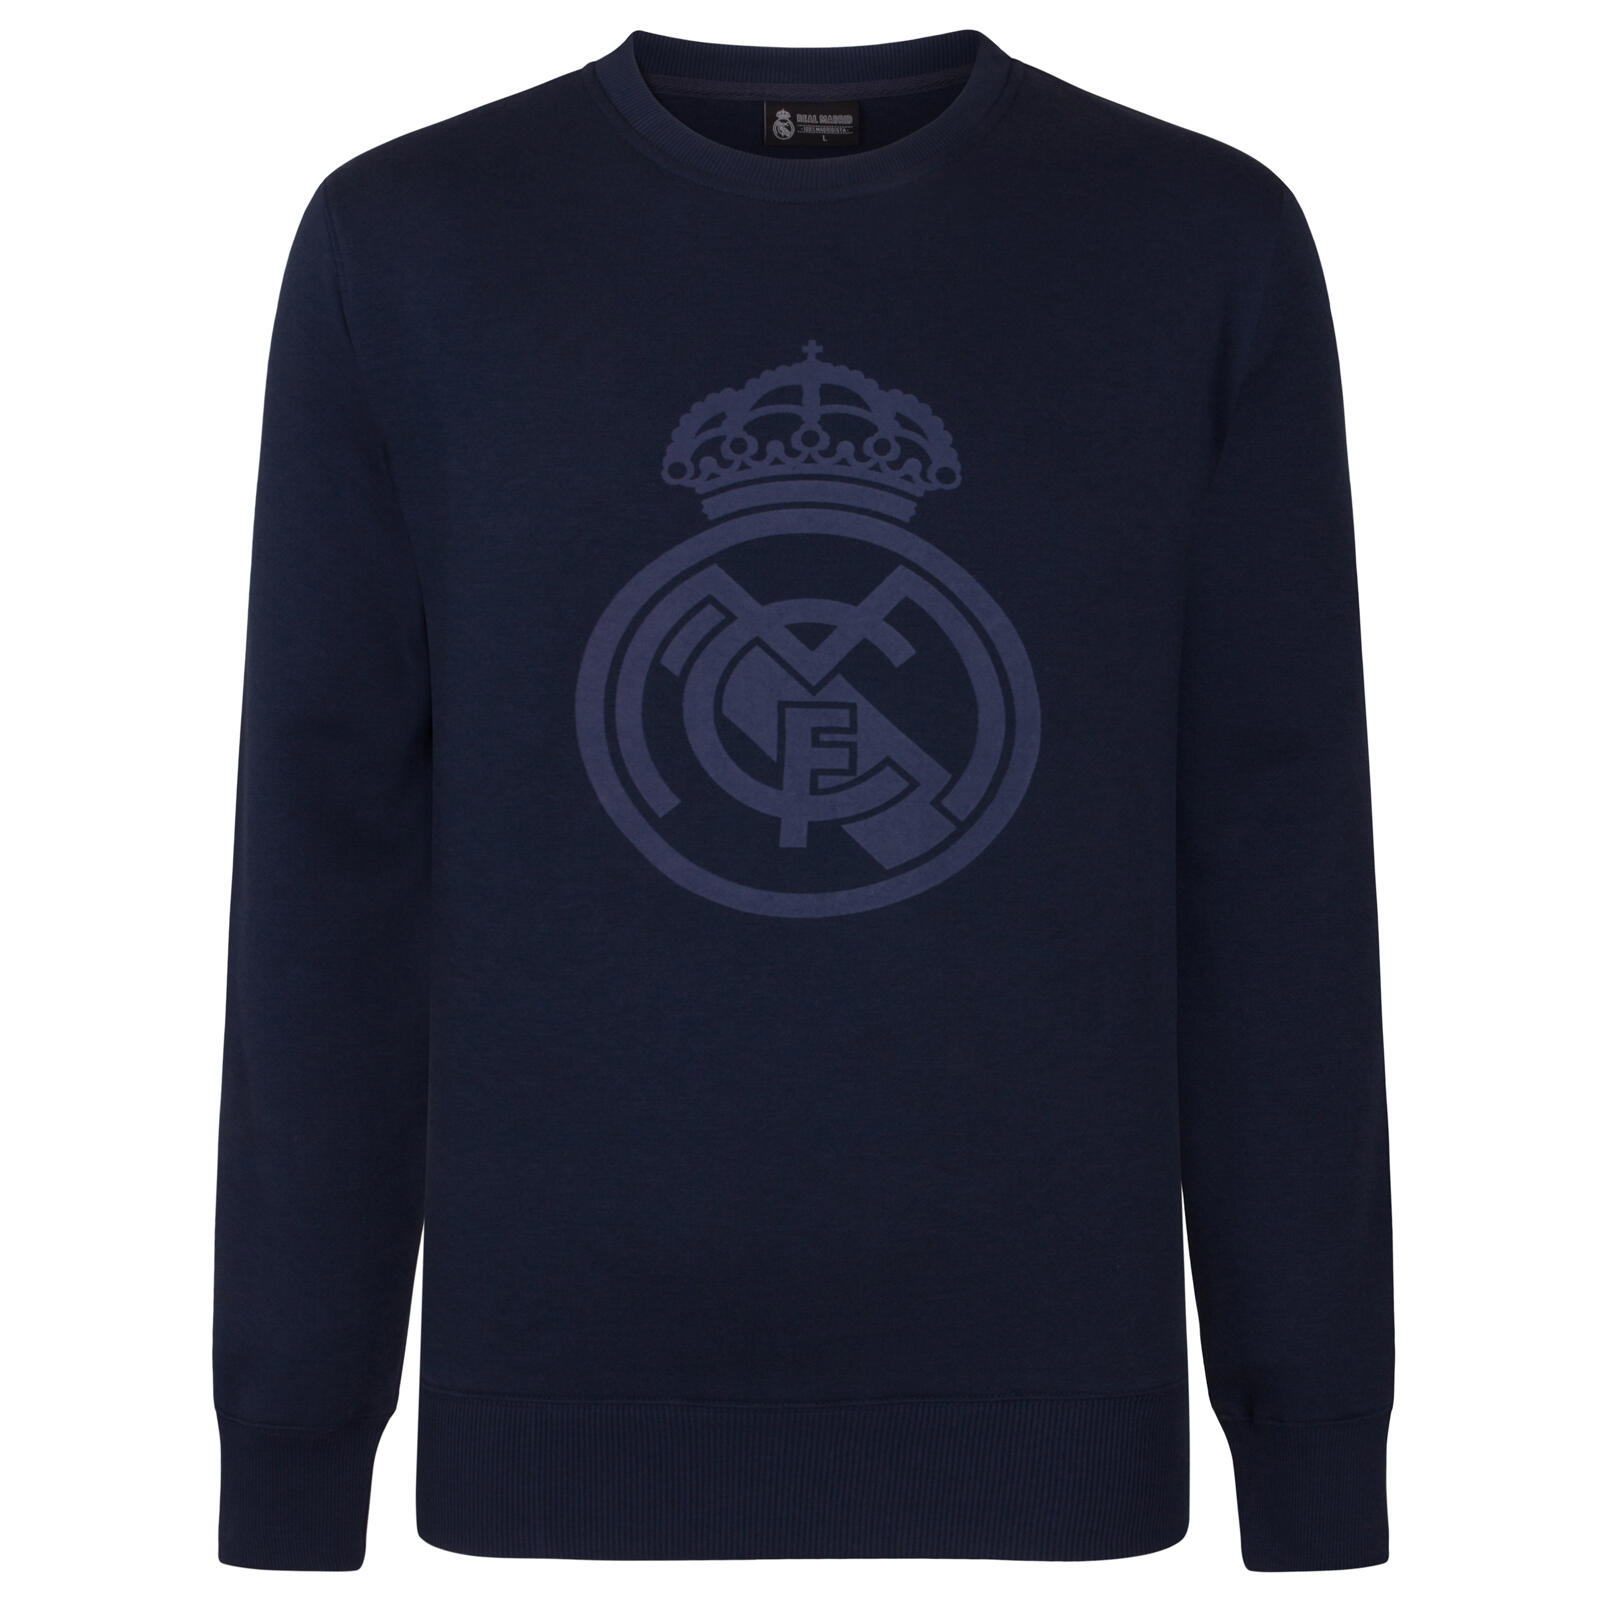 REAL MADRID Real Madrid Boys Sweatshirt Graphic Top Kids OFFICIAL Football Gift